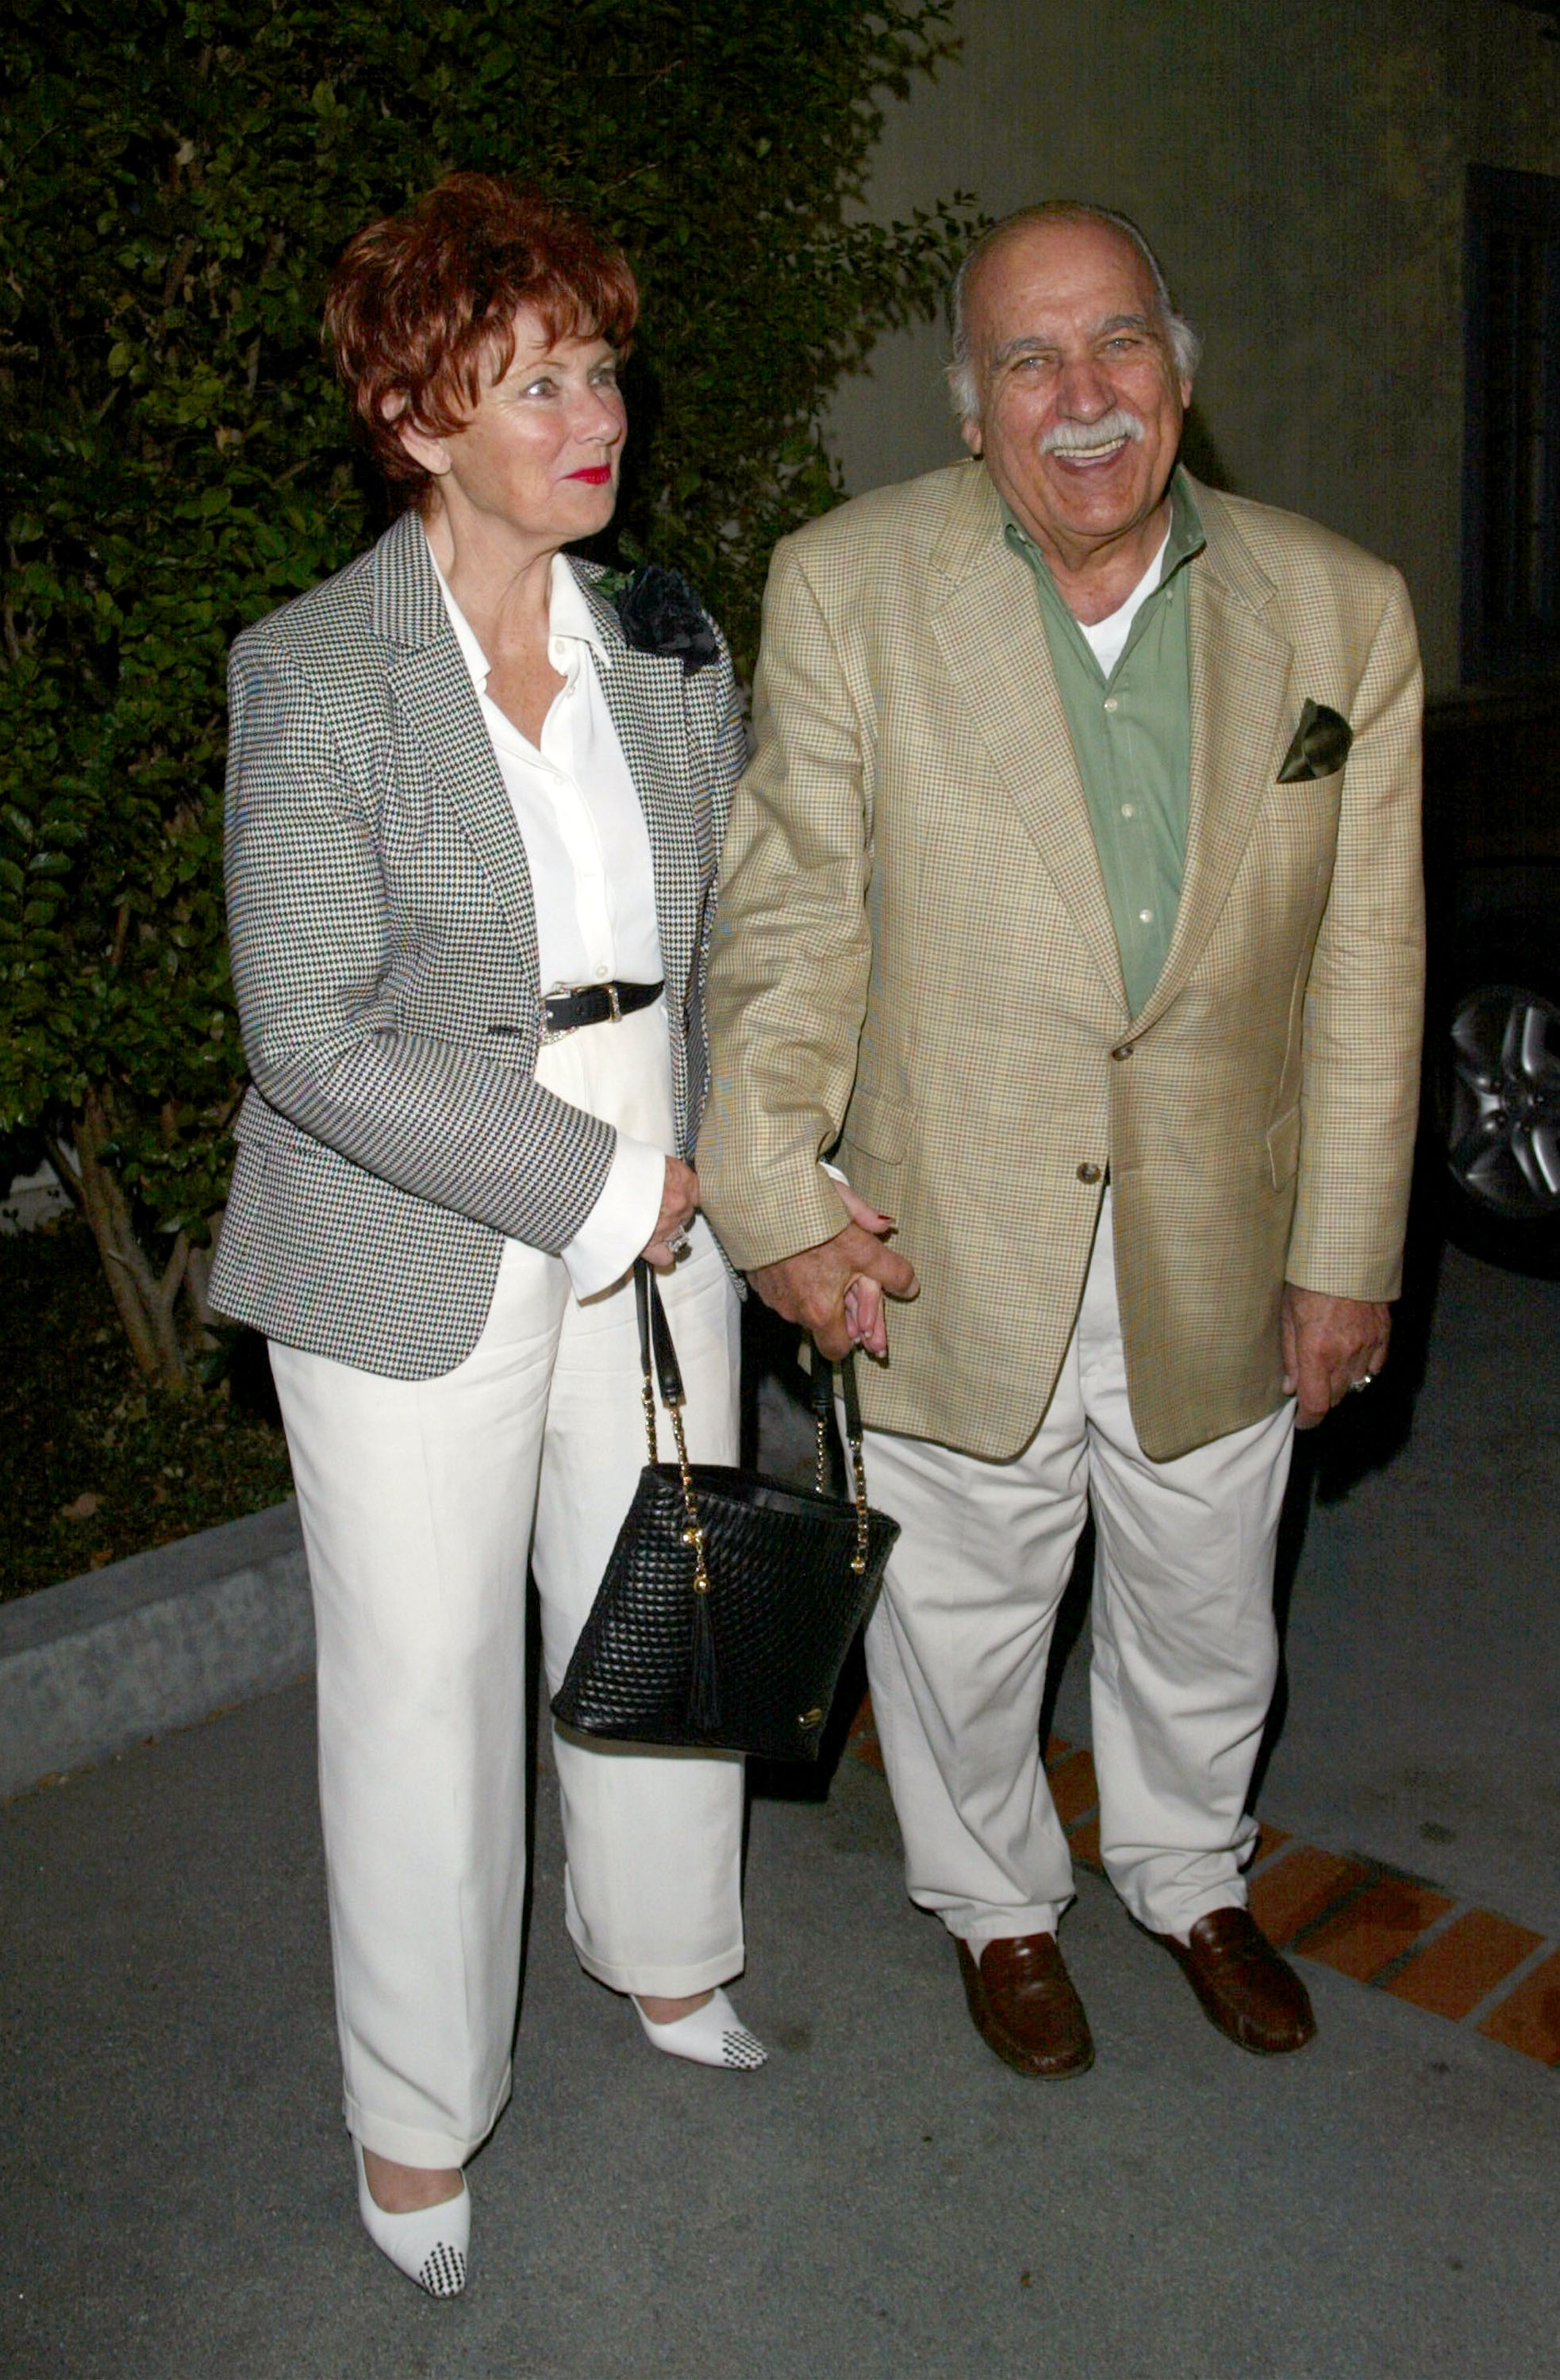 Marion Ross and Paul Michael on September 14, 2002 in Burbank, California | Source: Getty Images